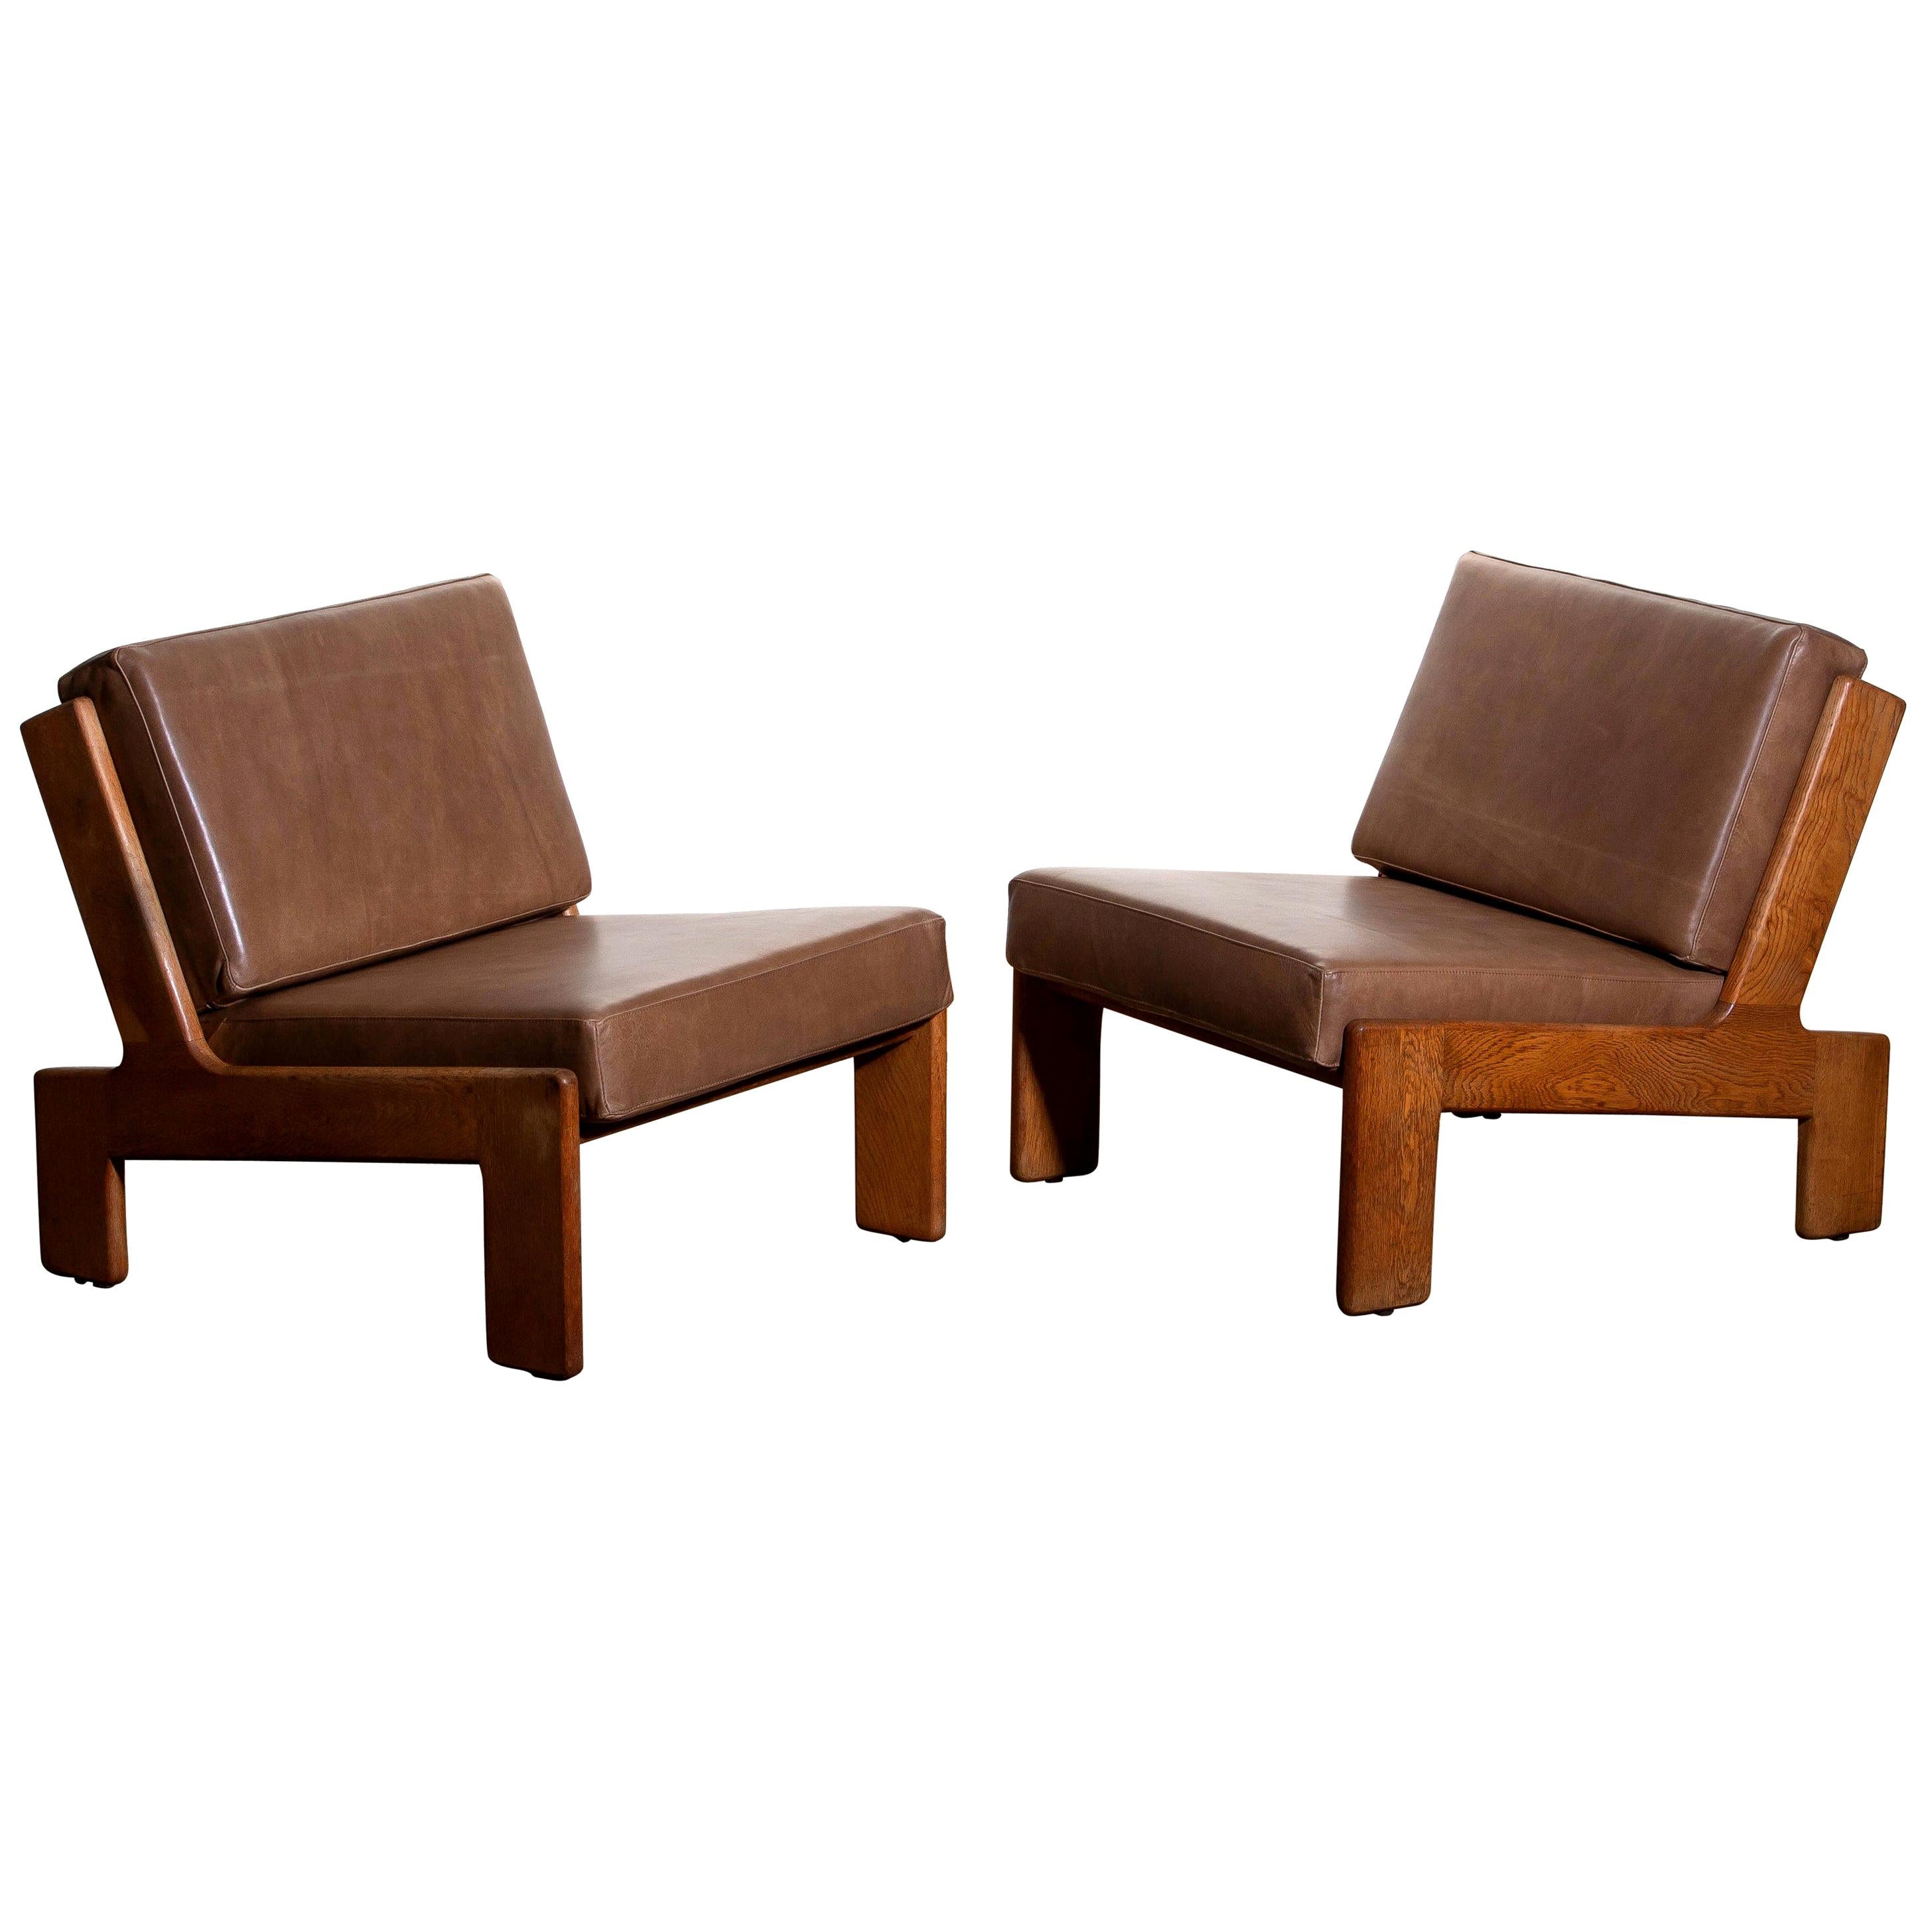 1960s, Pair of Oak and Leather Cubist Lounge Chairs by Esko Pajamies for Asko